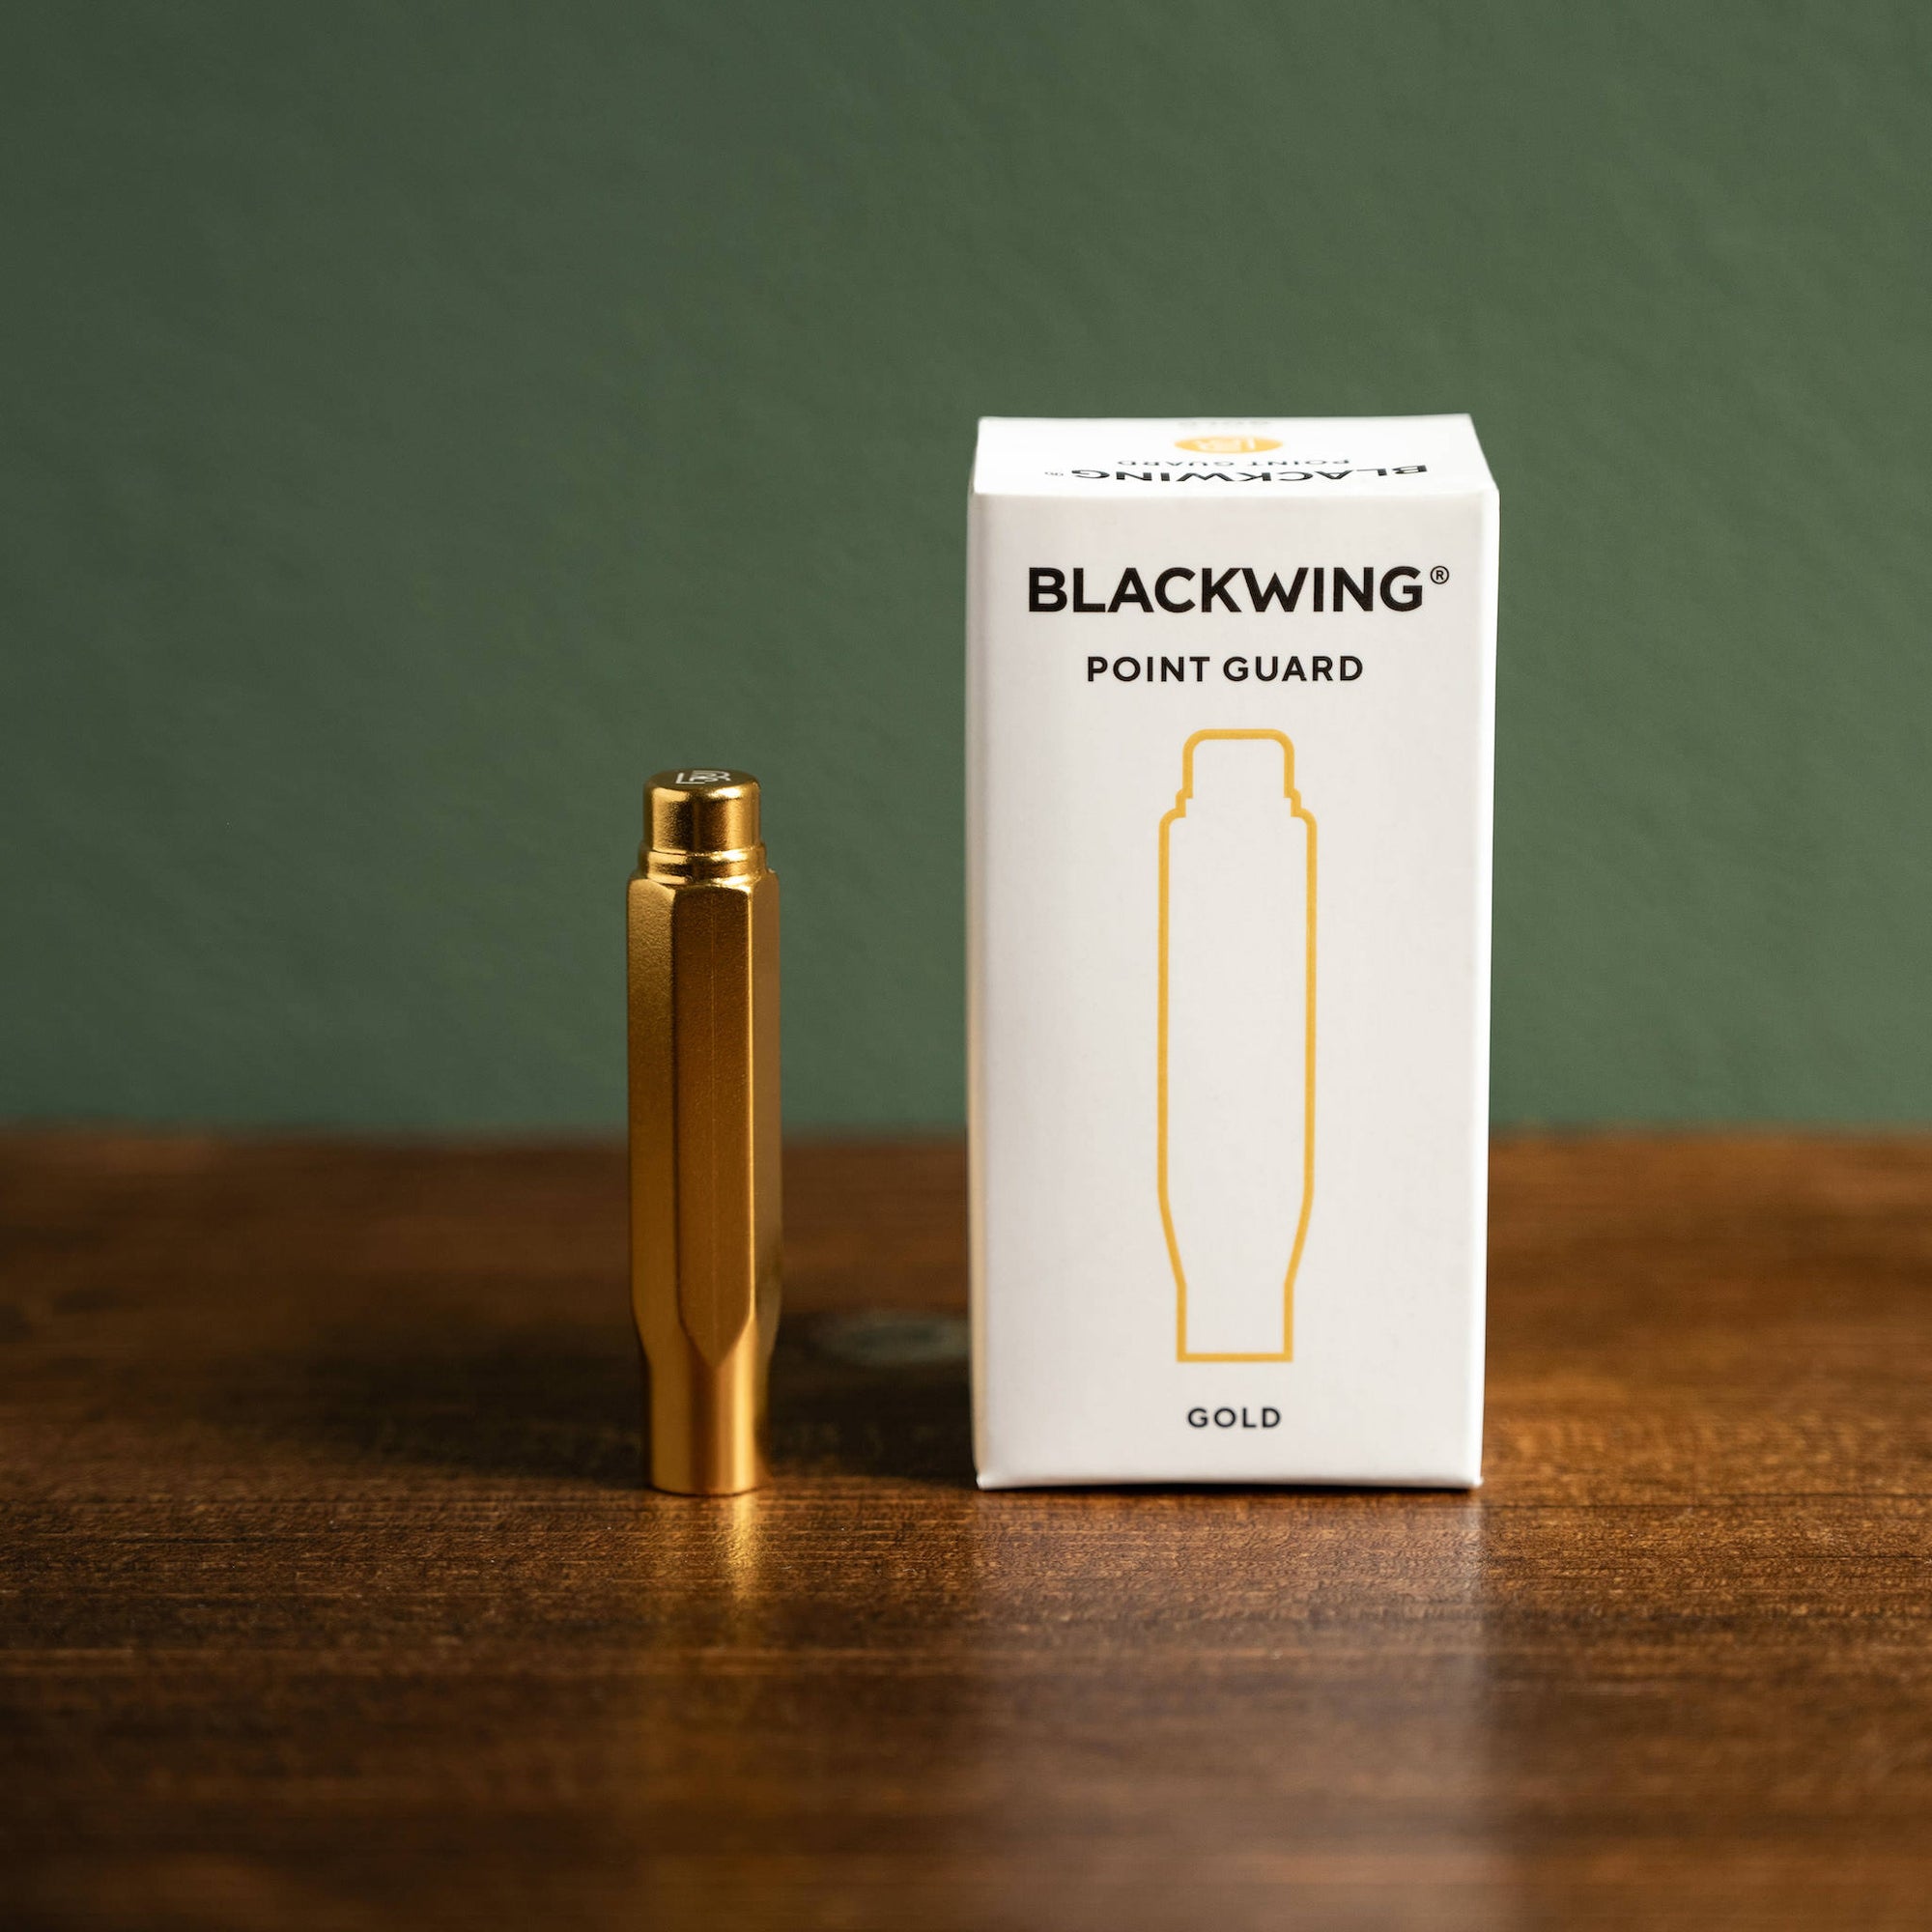 Blackwing Gold Point Guard & Box